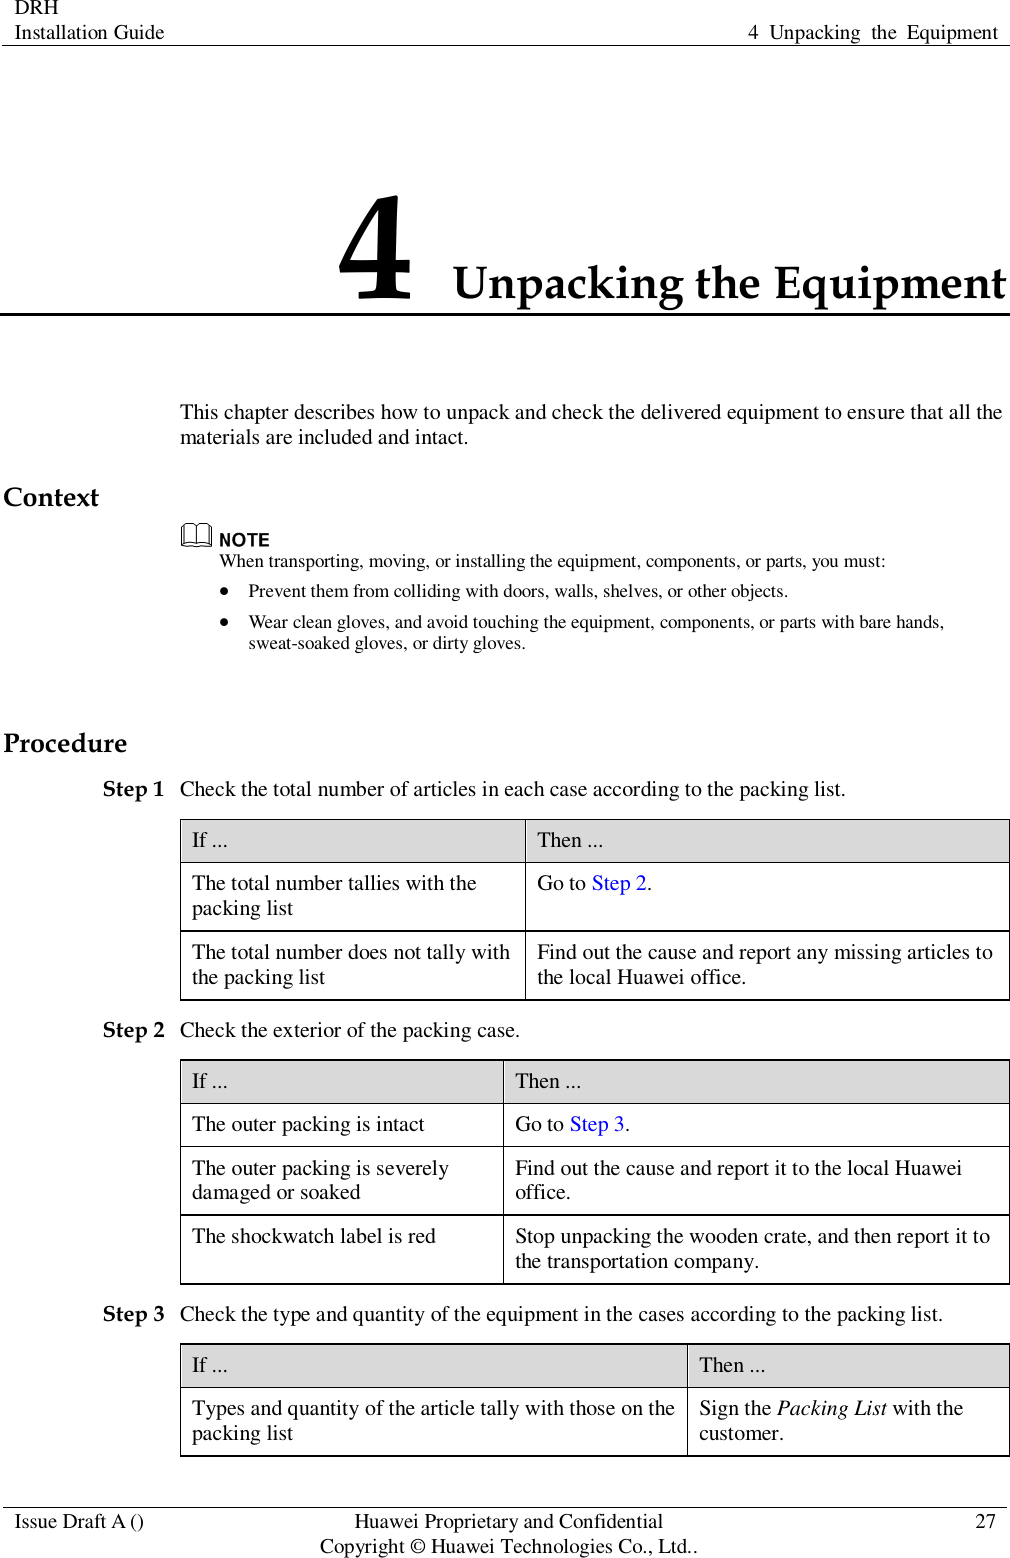 DRH   Installation Guide 4  Unpacking  the  Equipment  Issue Draft A () Huawei Proprietary and Confidential                                     Copyright © Huawei Technologies Co., Ltd.. 27  4 Unpacking the Equipment This chapter describes how to unpack and check the delivered equipment to ensure that all the materials are included and intact. Context  When transporting, moving, or installing the equipment, components, or parts, you must:  Prevent them from colliding with doors, walls, shelves, or other objects.  Wear clean gloves, and avoid touching the equipment, components, or parts with bare hands, sweat-soaked gloves, or dirty gloves.  Procedure Step 1 Check the total number of articles in each case according to the packing list. If ... Then ... The total number tallies with the packing list Go to Step 2. The total number does not tally with the packing list Find out the cause and report any missing articles to the local Huawei office. Step 2 Check the exterior of the packing case. If ... Then ... The outer packing is intact Go to Step 3. The outer packing is severely damaged or soaked Find out the cause and report it to the local Huawei office. The shockwatch label is red Stop unpacking the wooden crate, and then report it to the transportation company. Step 3 Check the type and quantity of the equipment in the cases according to the packing list. If ... Then ... Types and quantity of the article tally with those on the packing list Sign the Packing List with the customer. 